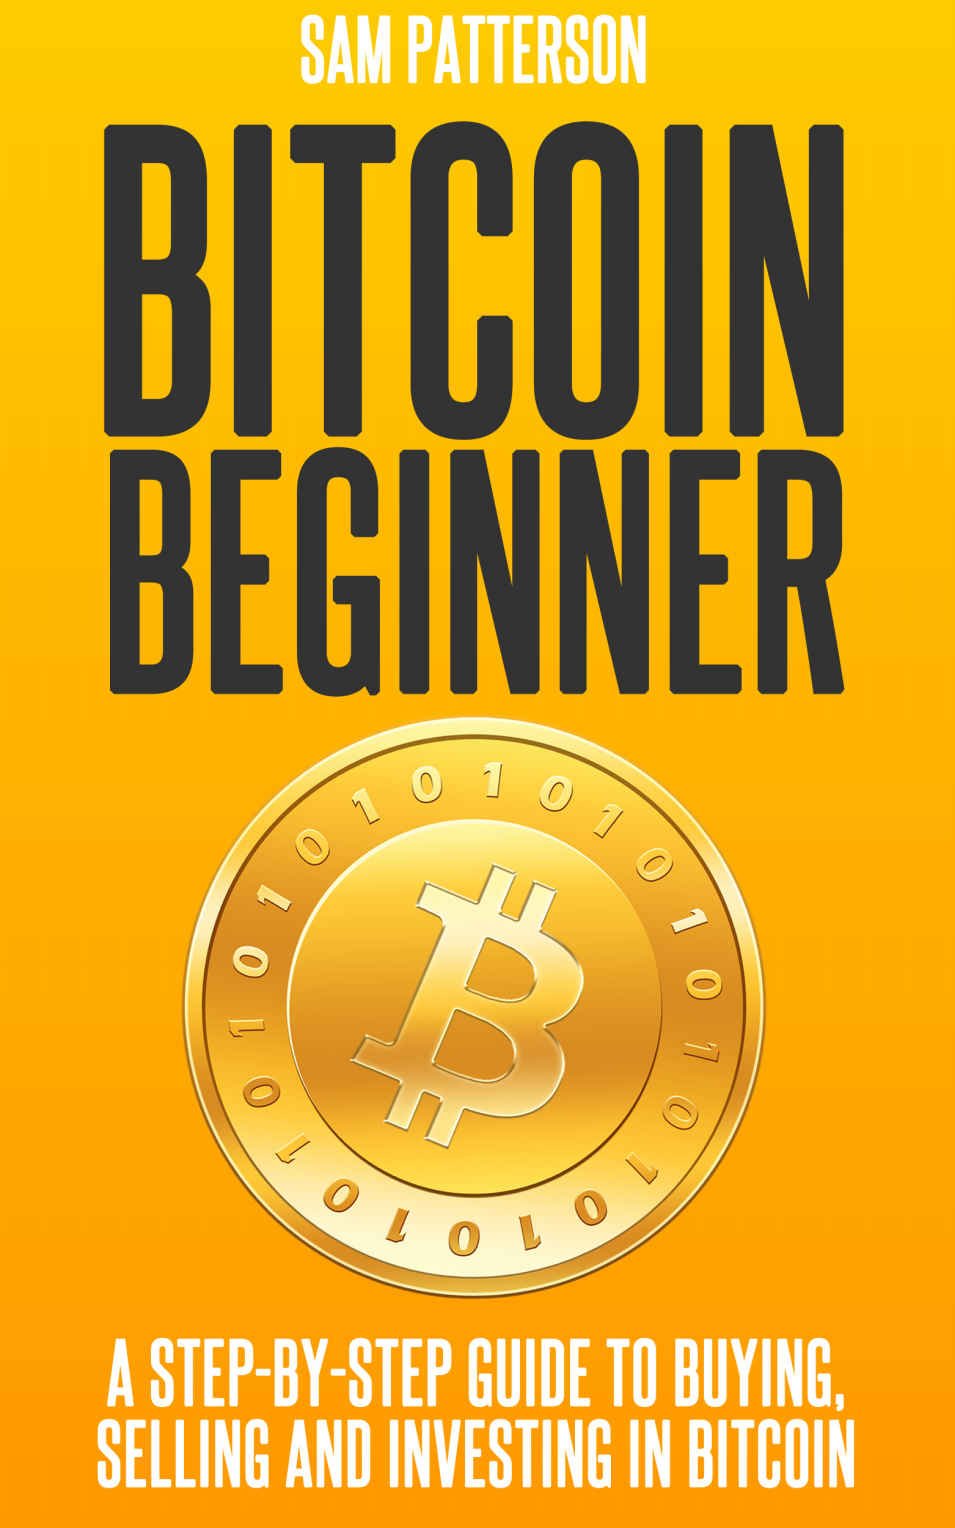 how to make money from buying and selling bitcoin